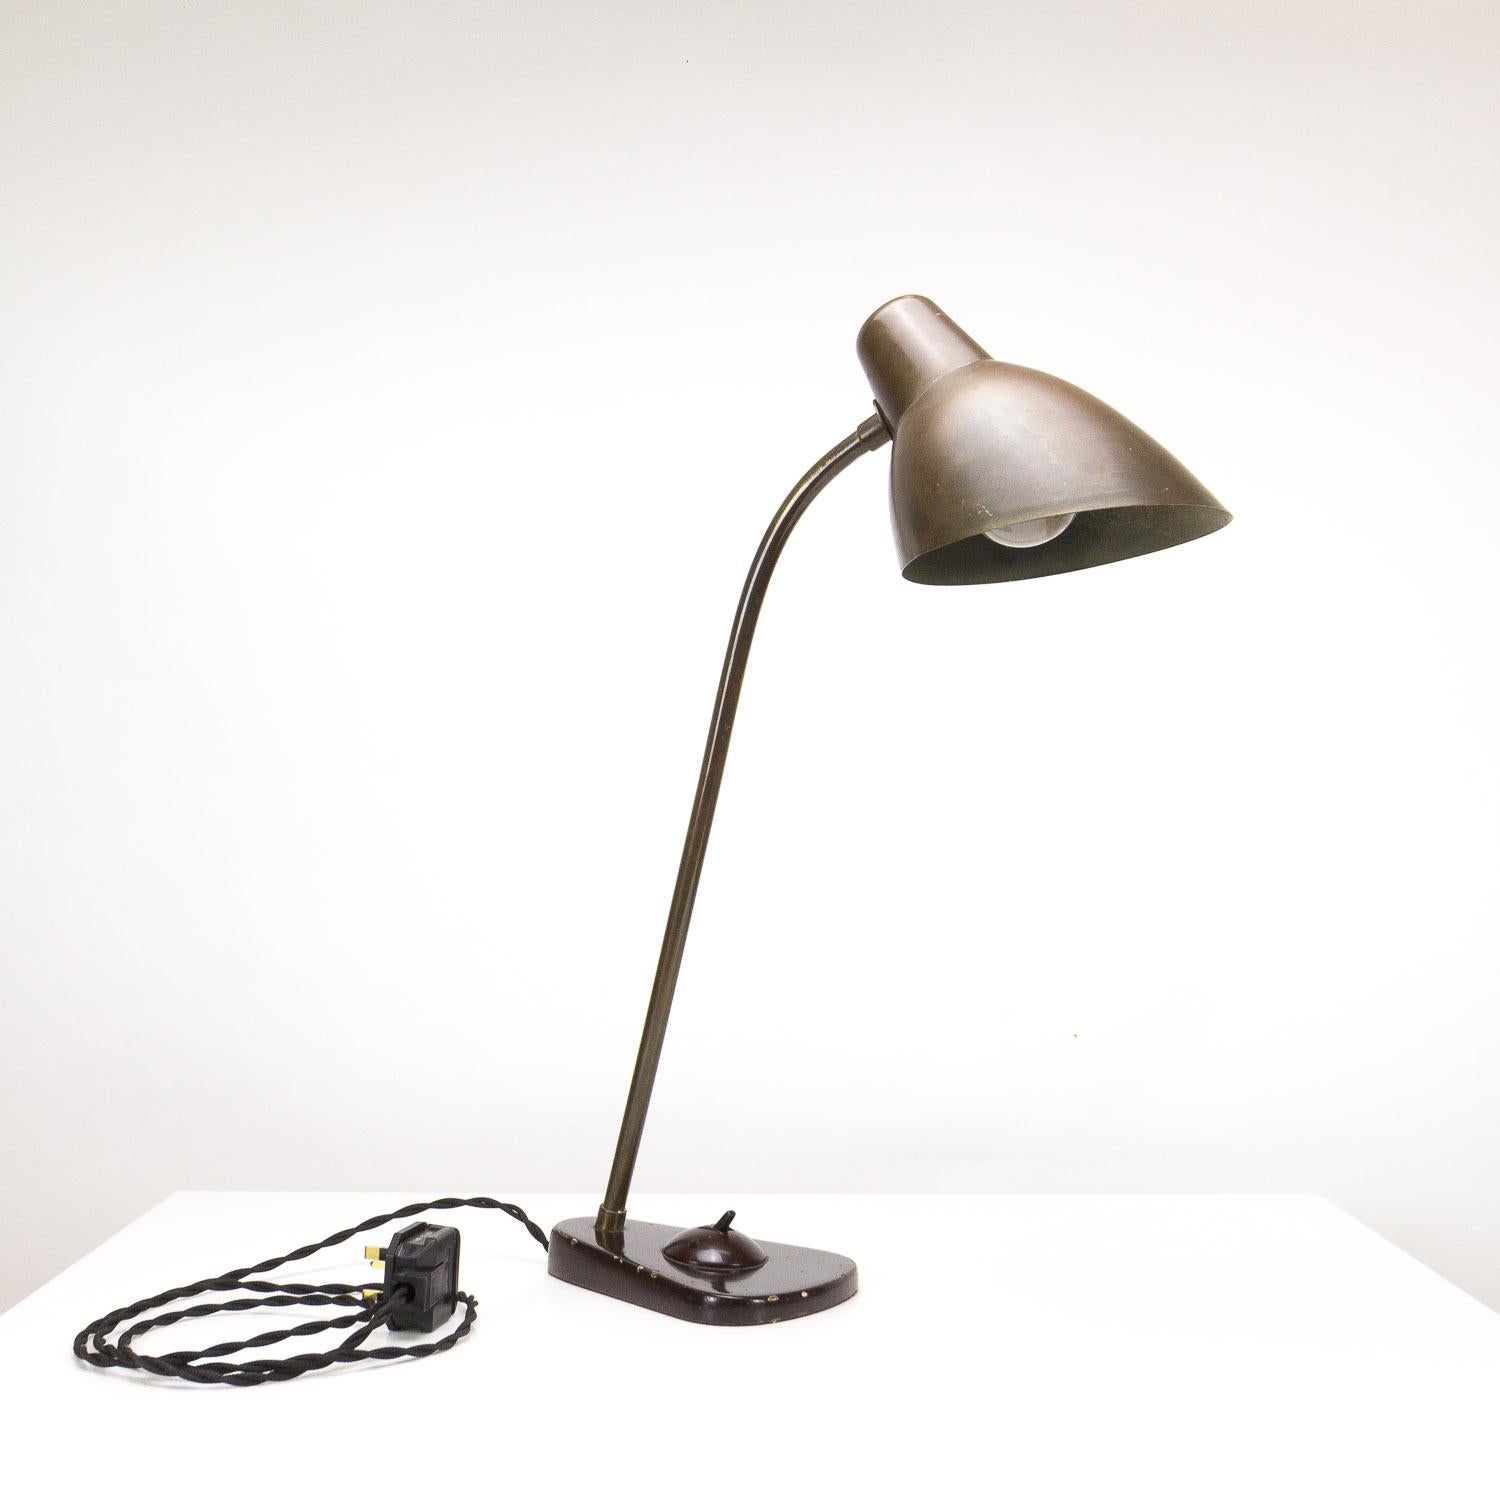 A rare Konduktørlampe designed by Vilhelm Lauritzen in Denmark, 1930s. Made for DSB by Louis Poulsen. Brass shade and stem, enamel coated cast iron base and Bakelite switch, all original. This light has elements of perfection in its design. The